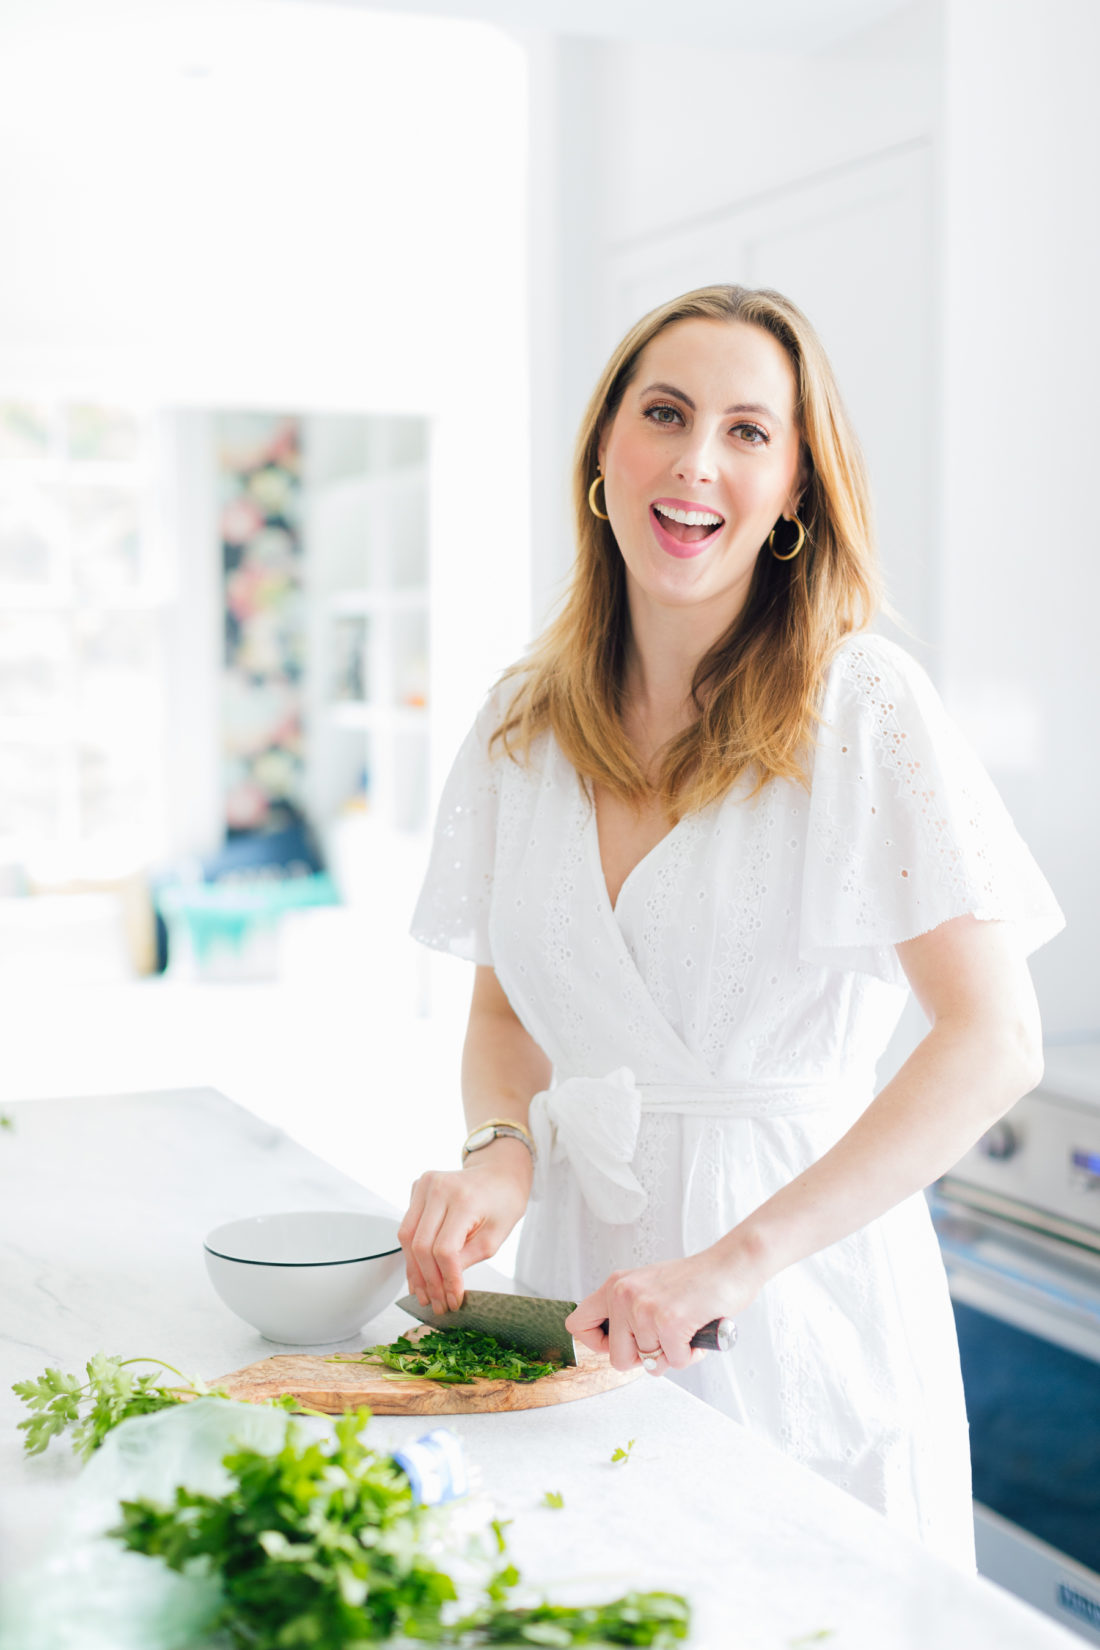 Eva Amurri Martino of Happily Eva After shares her Mother's Day Brunch table